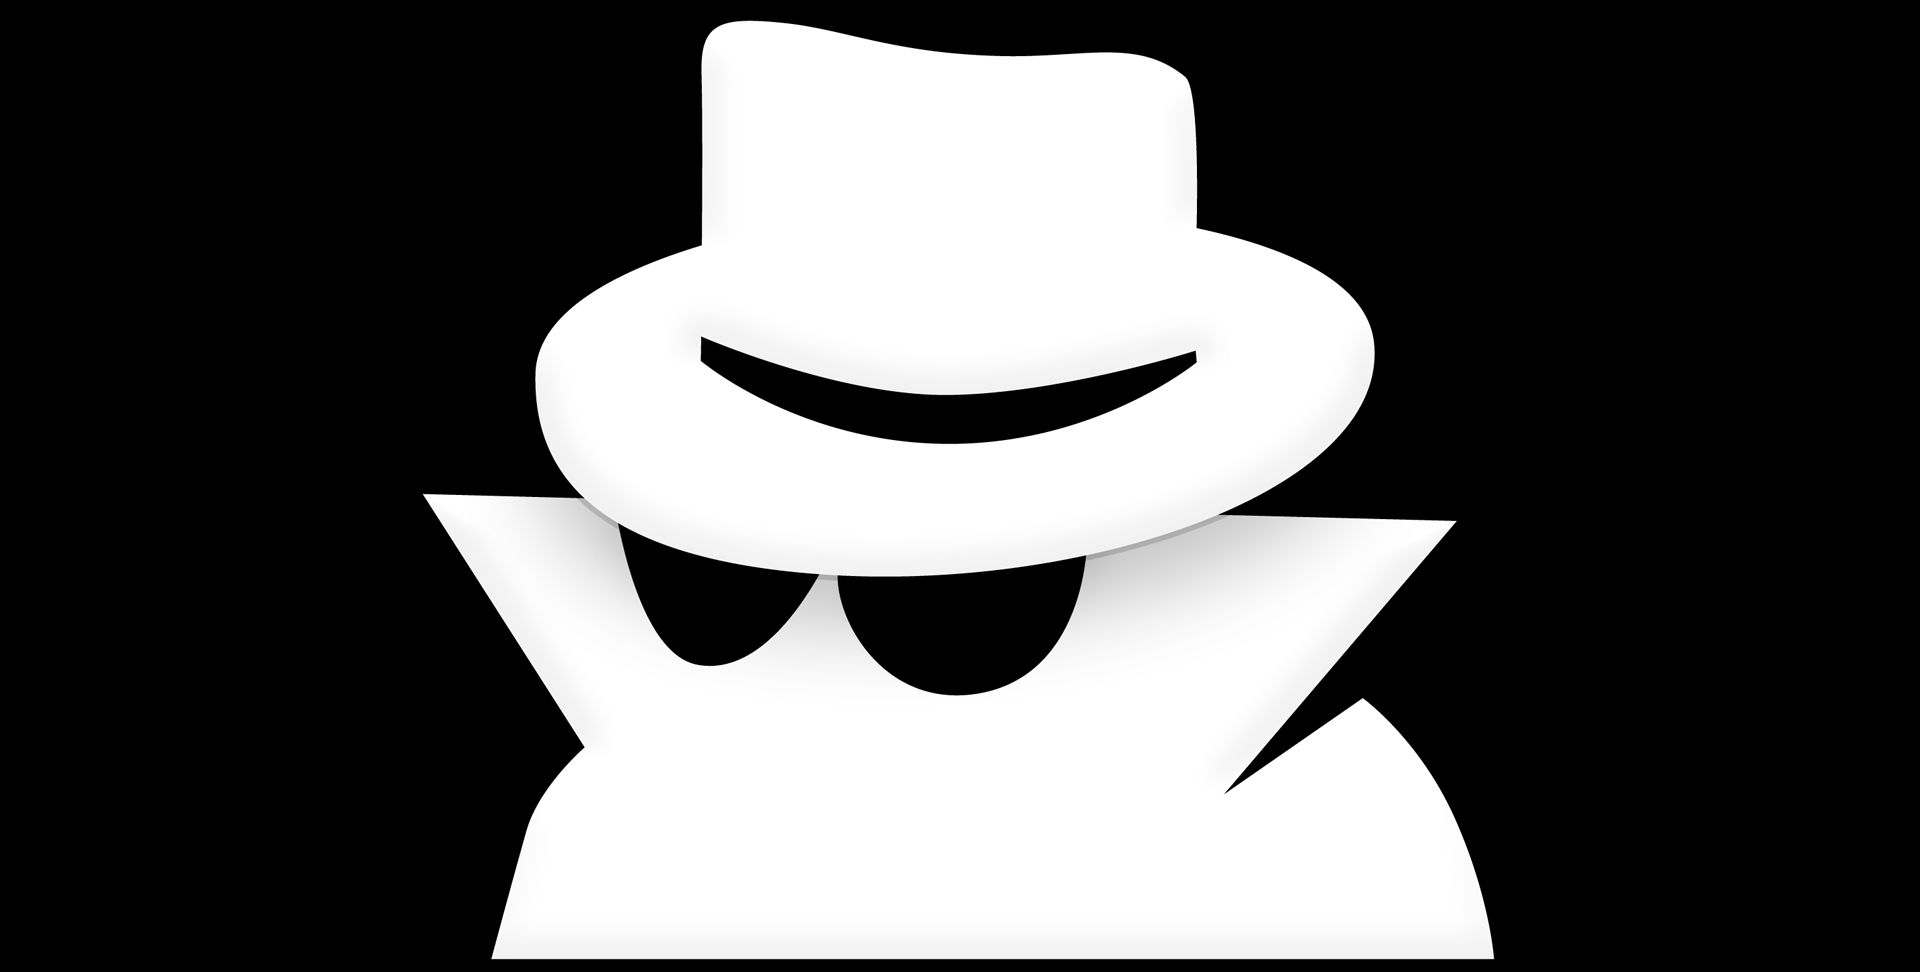 An analysis of private browsing modes in modern browsers